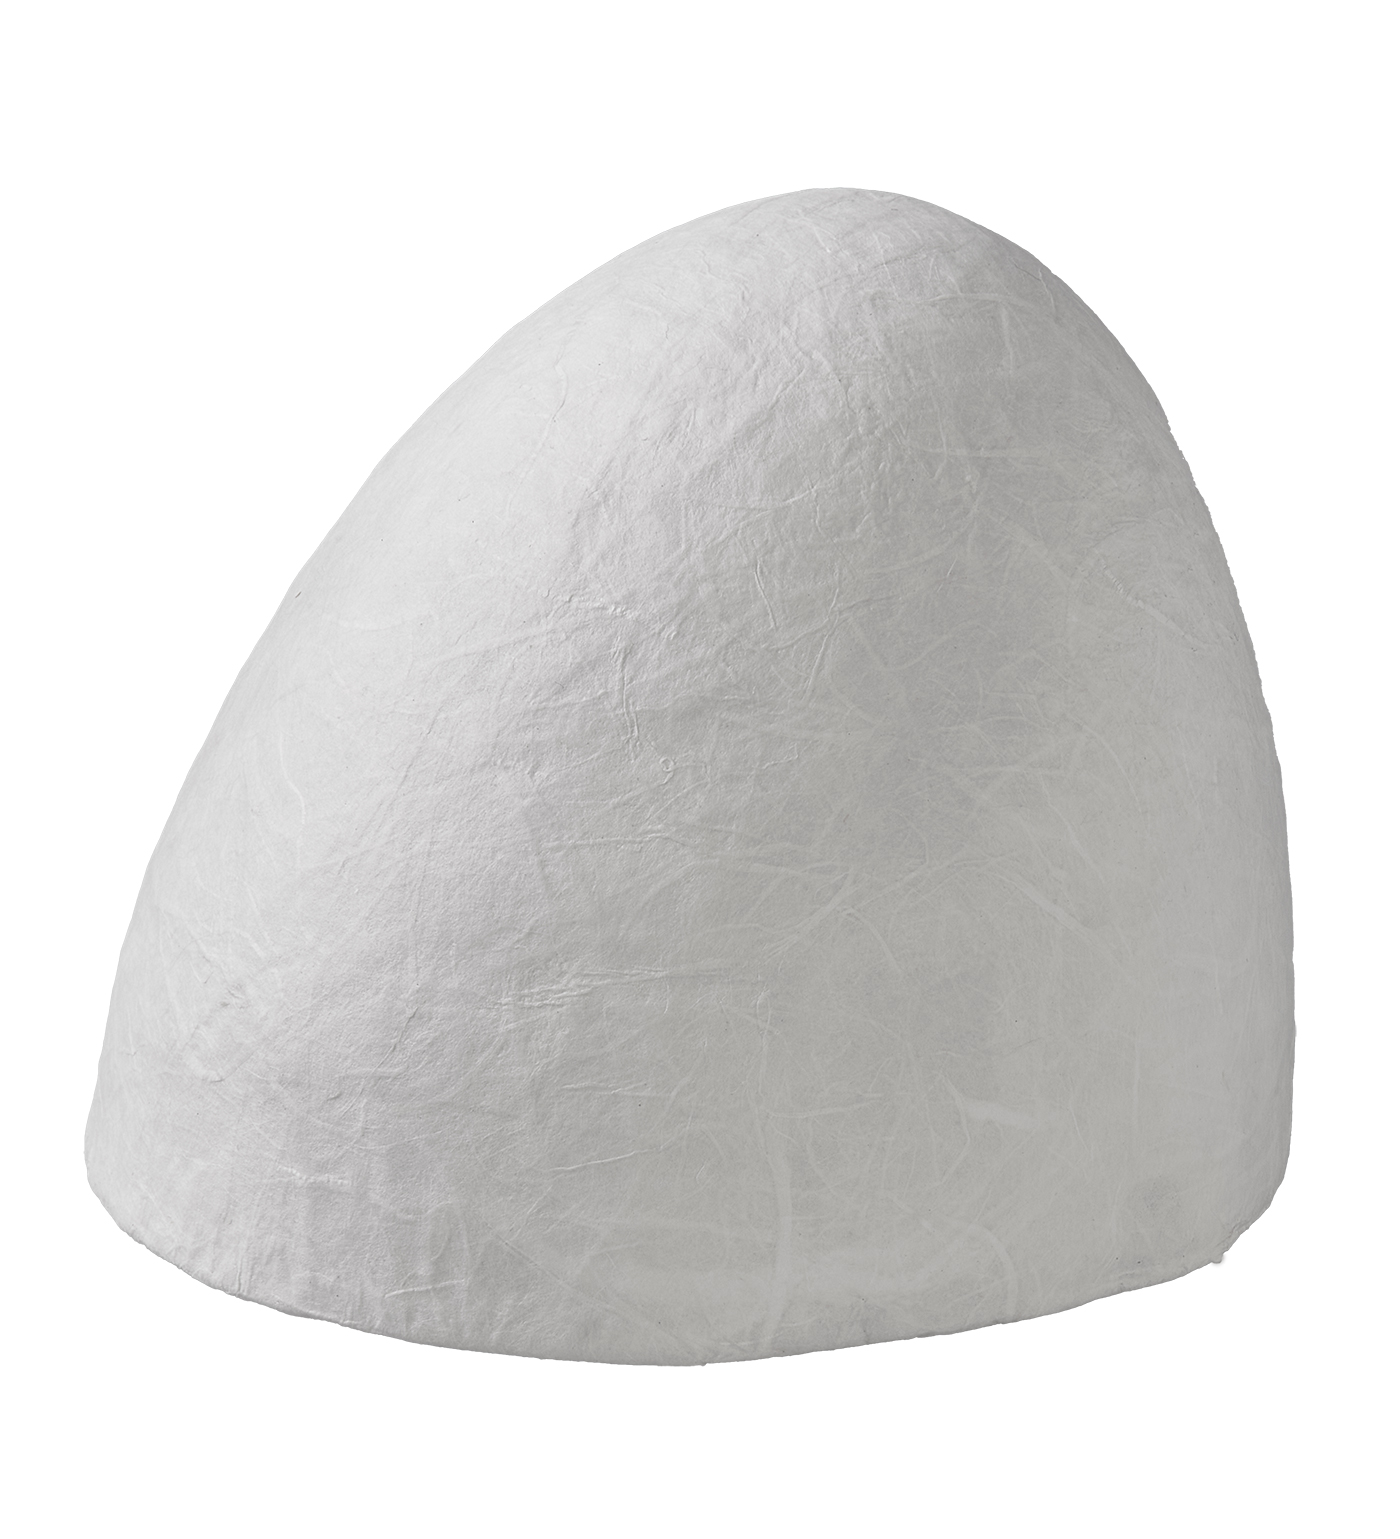 Egg-Shaped Display Bust, White, ø 180 mm - 1 piece